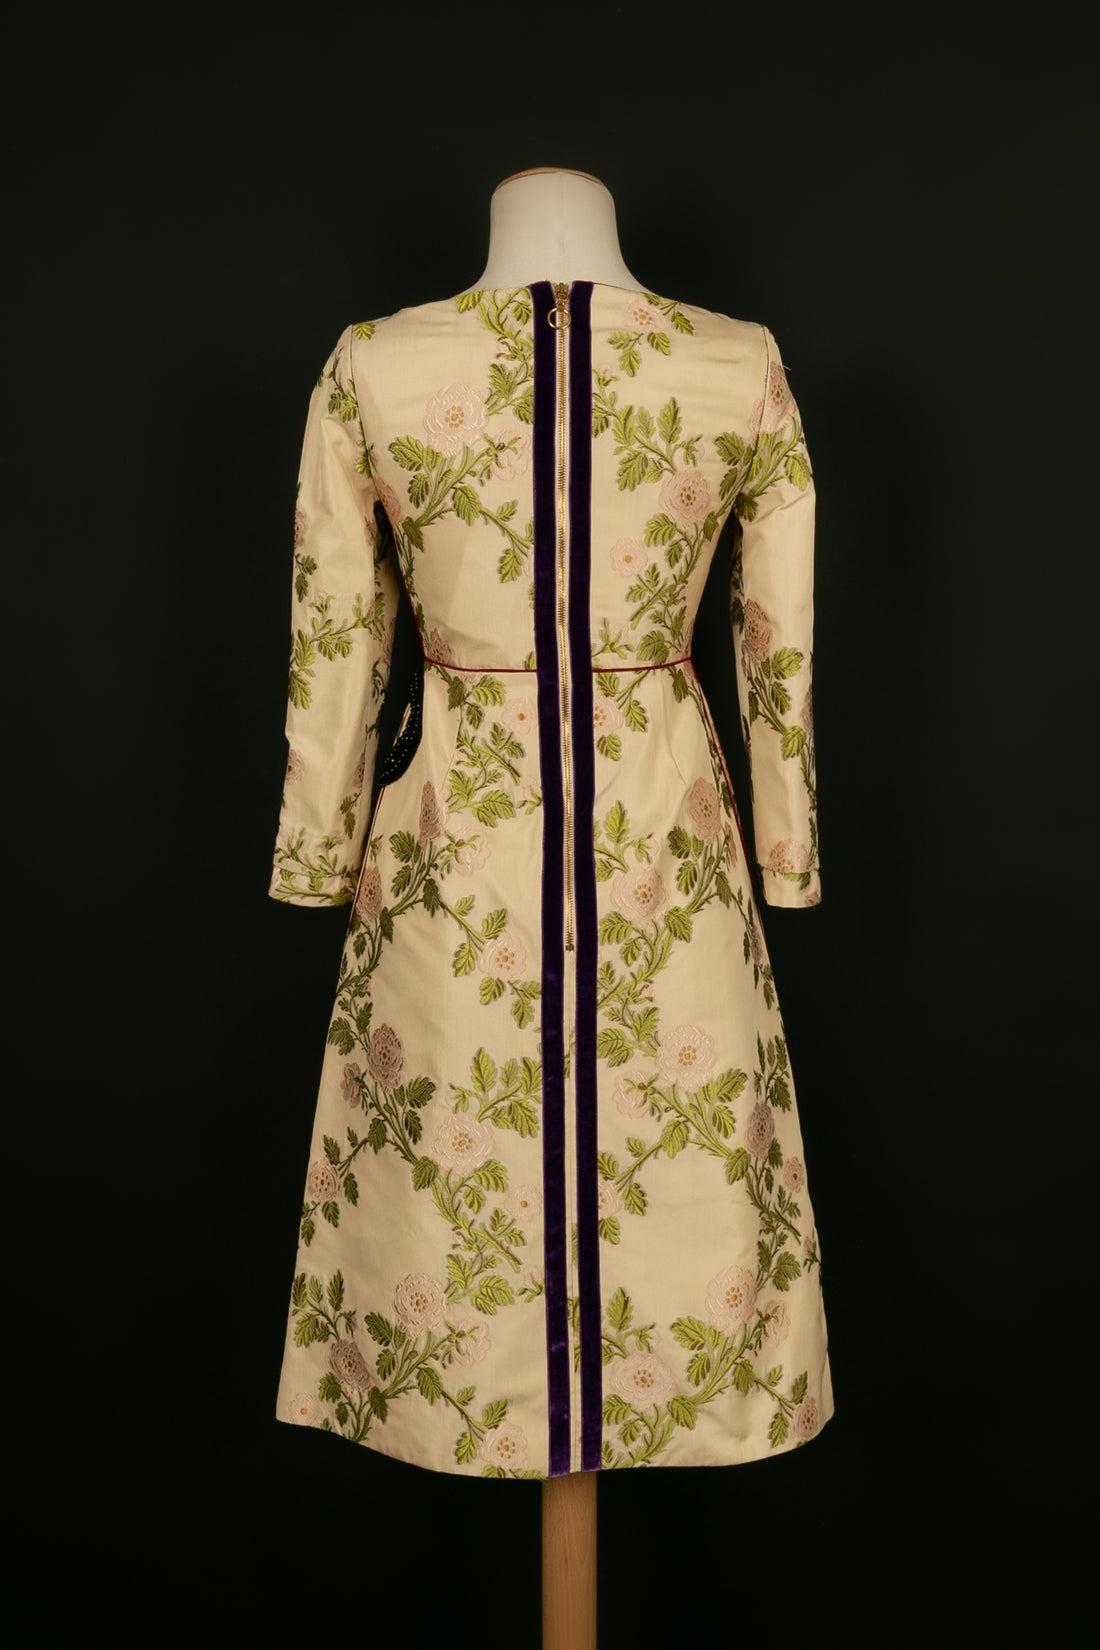 Women's Gucci Mid-Length Dress Pre-Fall with Floral Patterns, 2016 For Sale